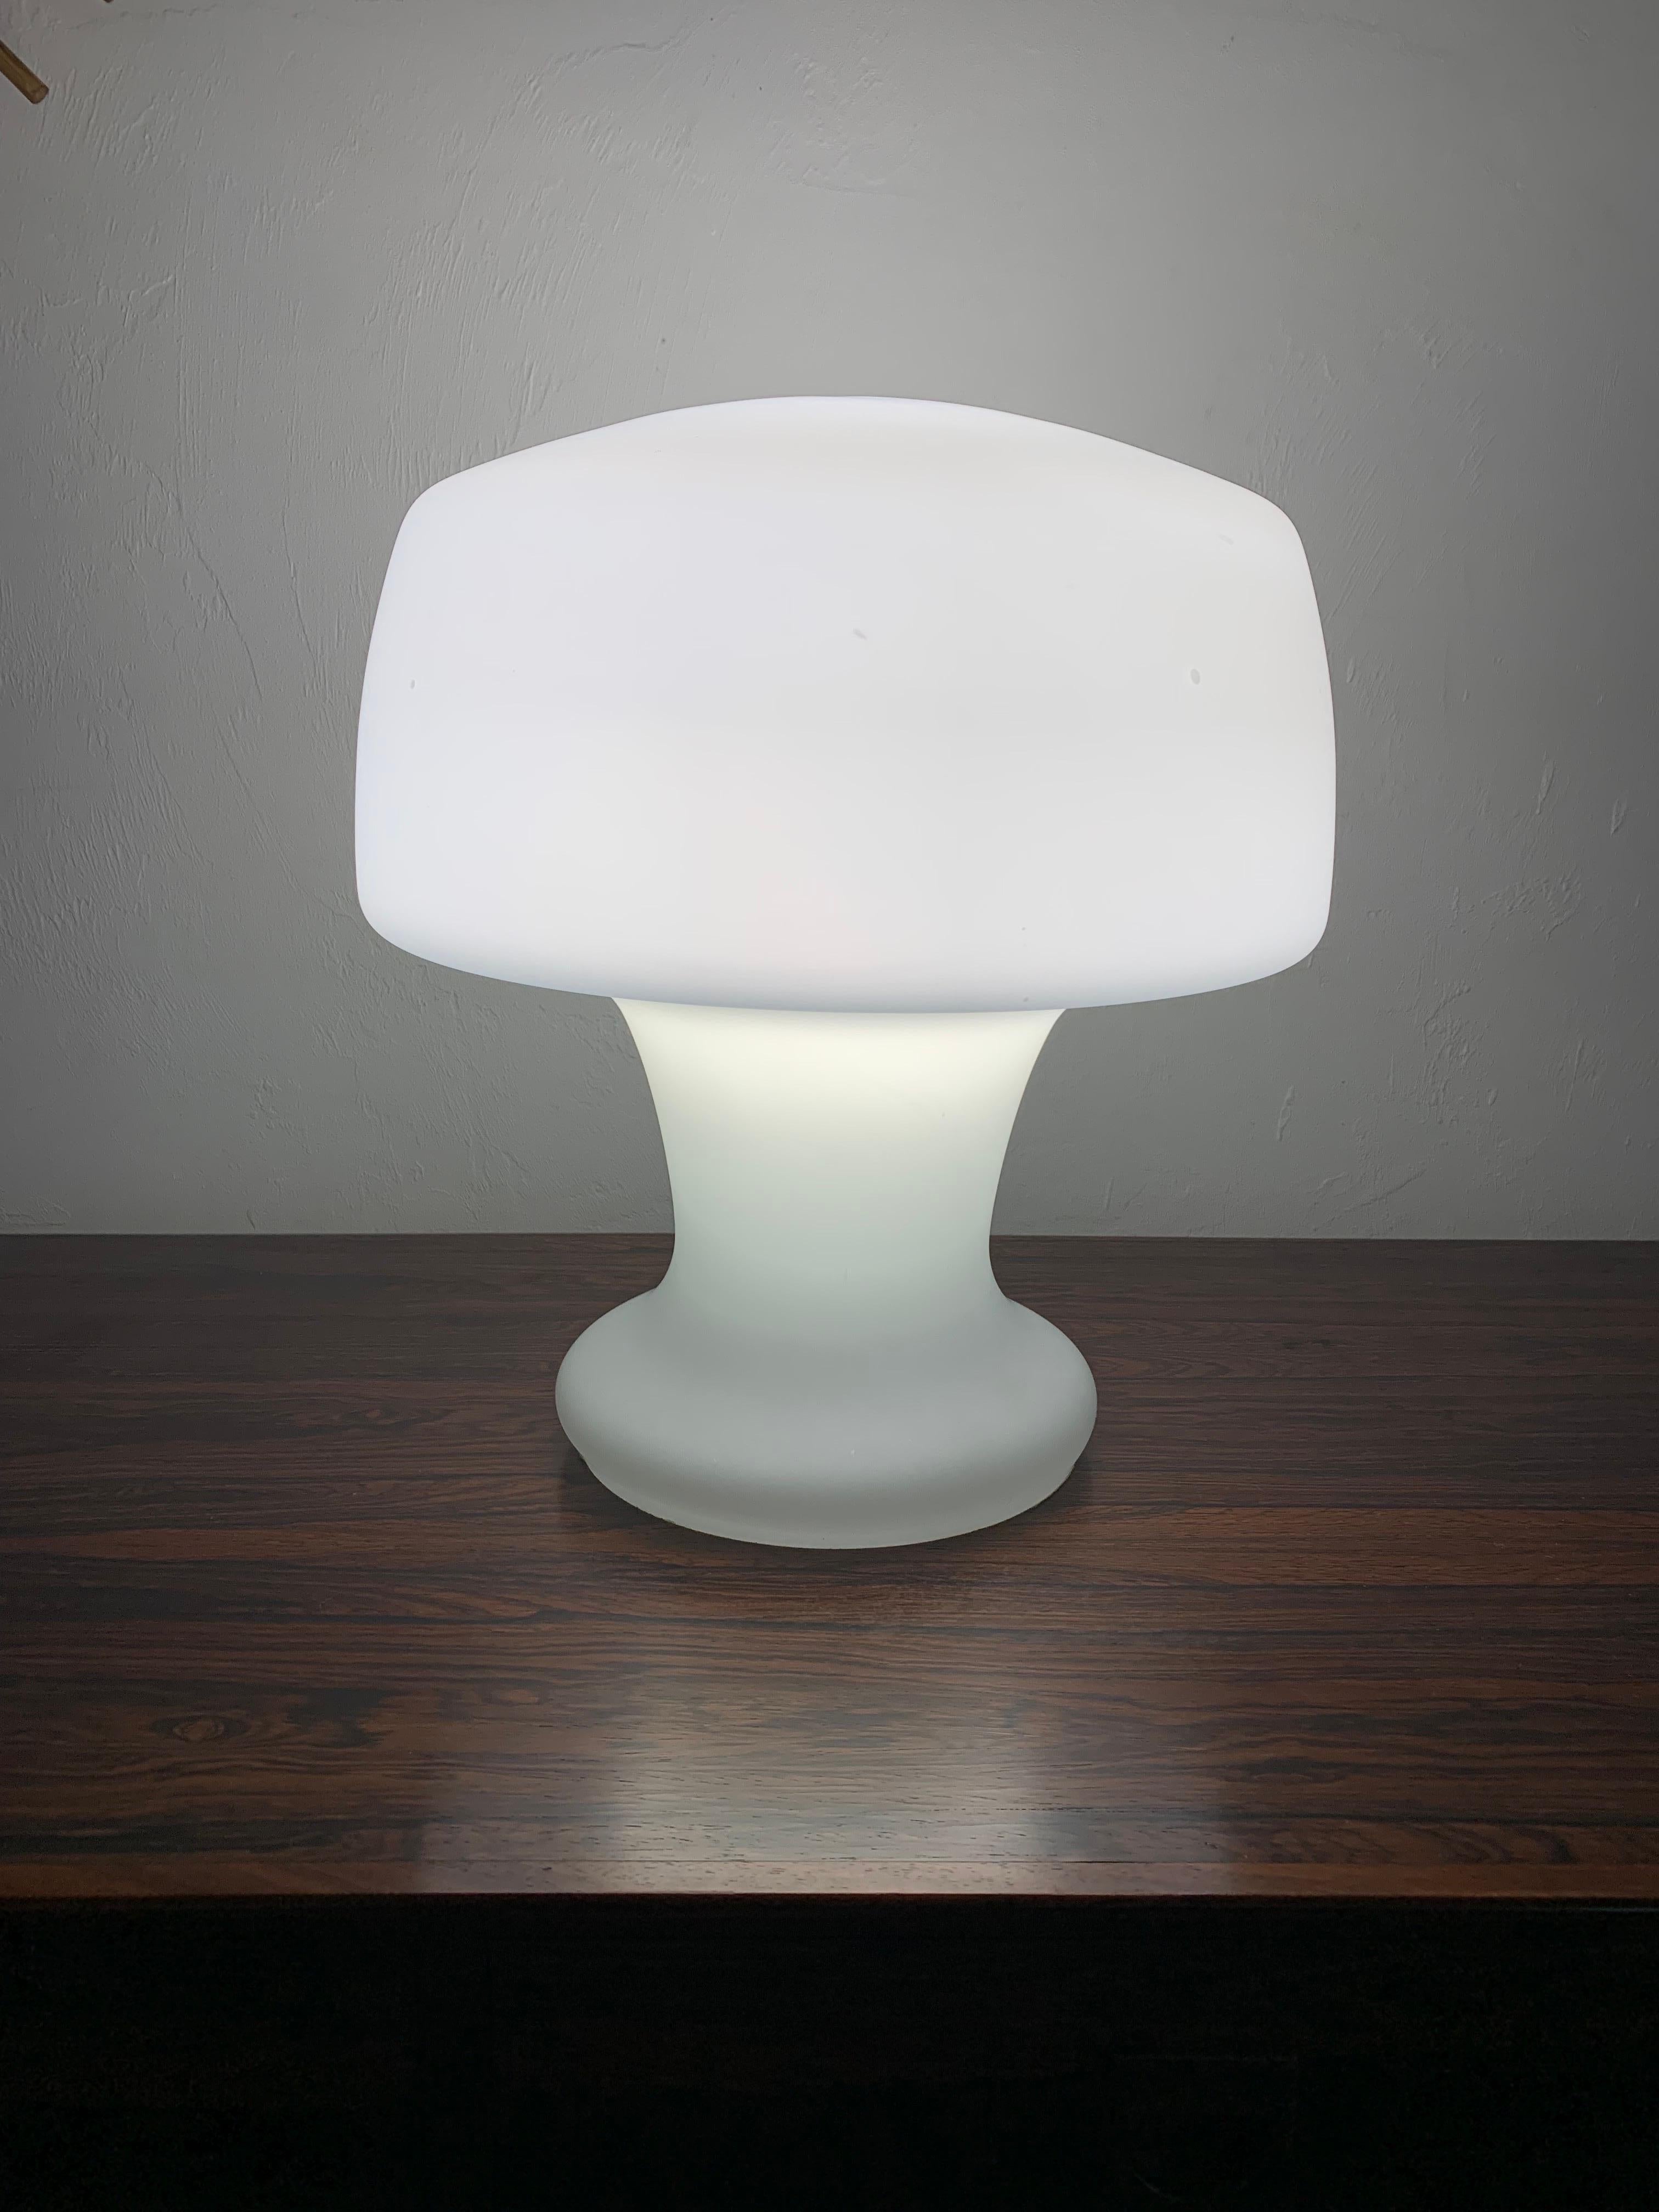 Mid century modern Laurel Mushroom table lamp. Blown opaque white glass forms a unique sculptural mushroom shape. Made from on solid piece of glass with a cord and switch to turn it on and off. True vintage piece. 

13” wide
13” deep 
14” high 